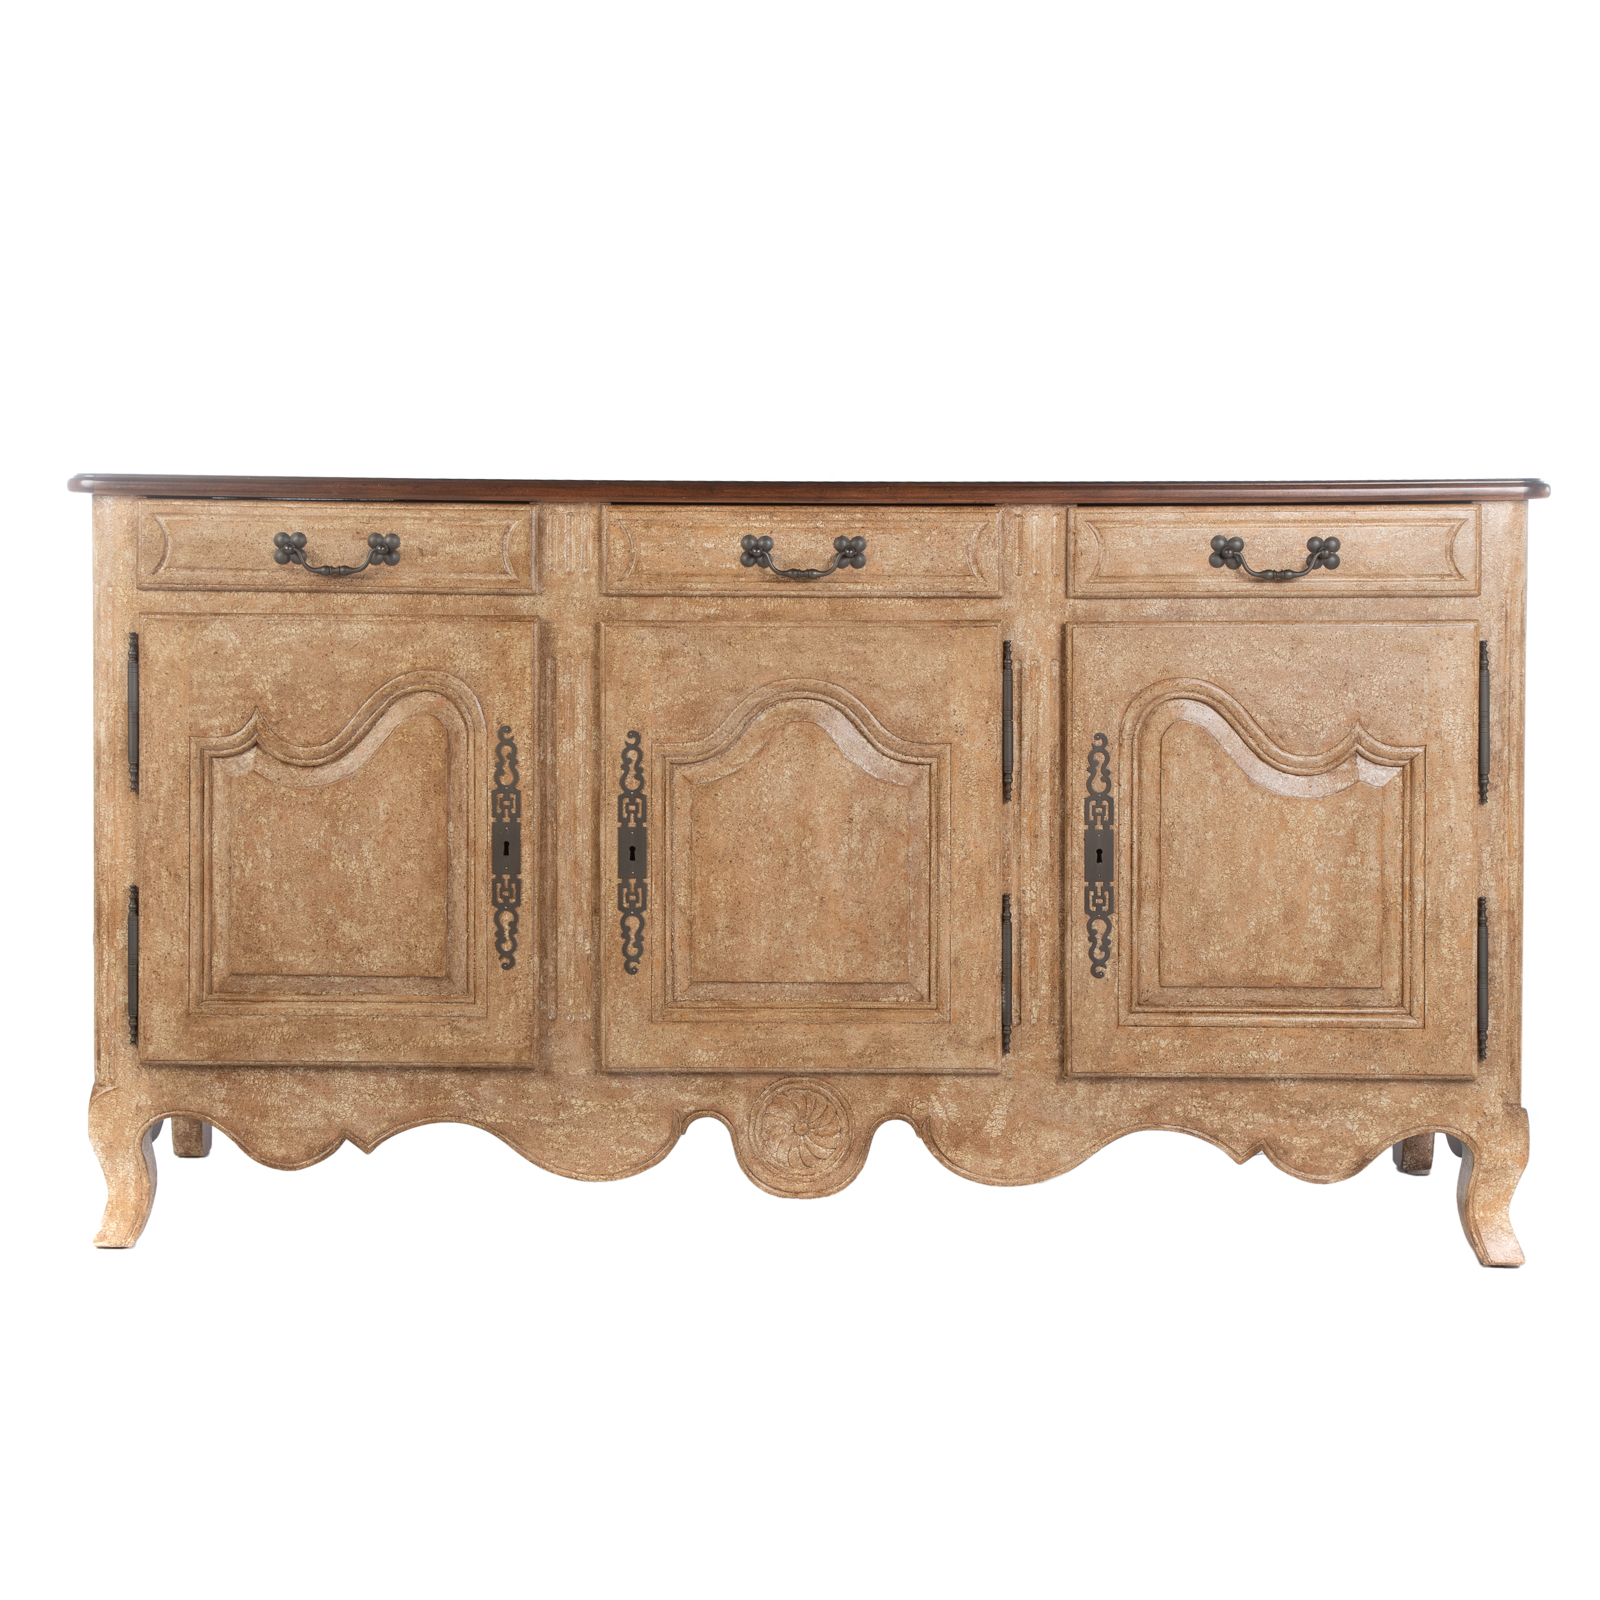 CUSTOM FRENCH COUNTRY BUFFET CONSOLE 29dd9d